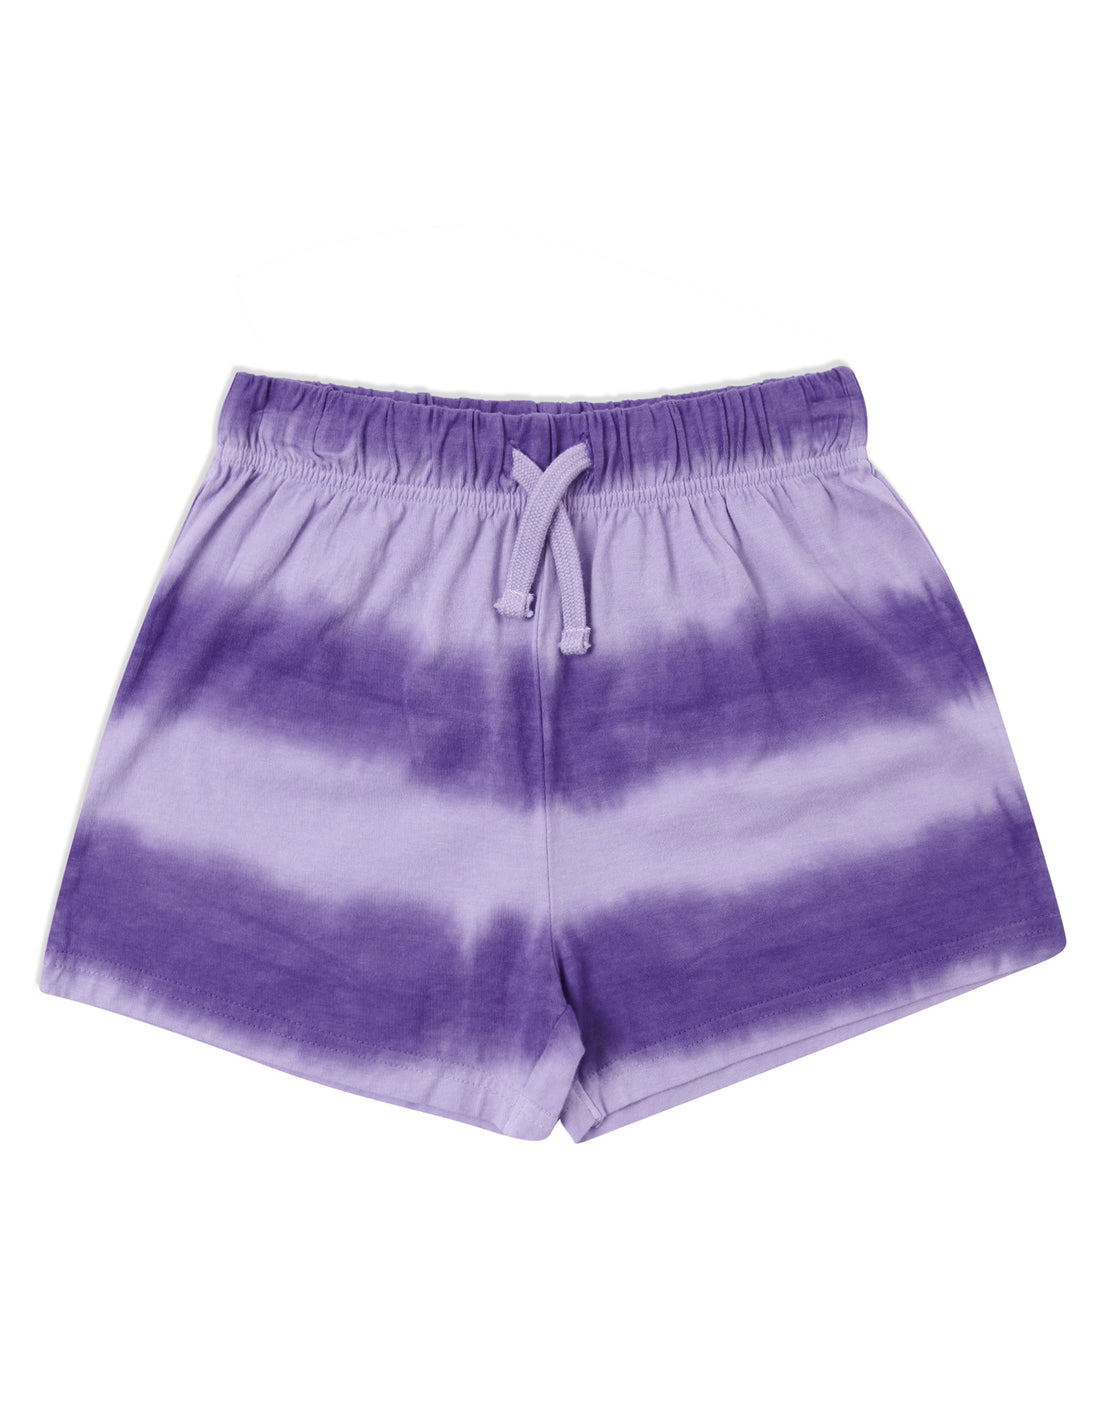 piuwrlz Shorts for Children's Boys Girls Solid Color Single Piece Short  Trousers Purple Size 2-3Years 